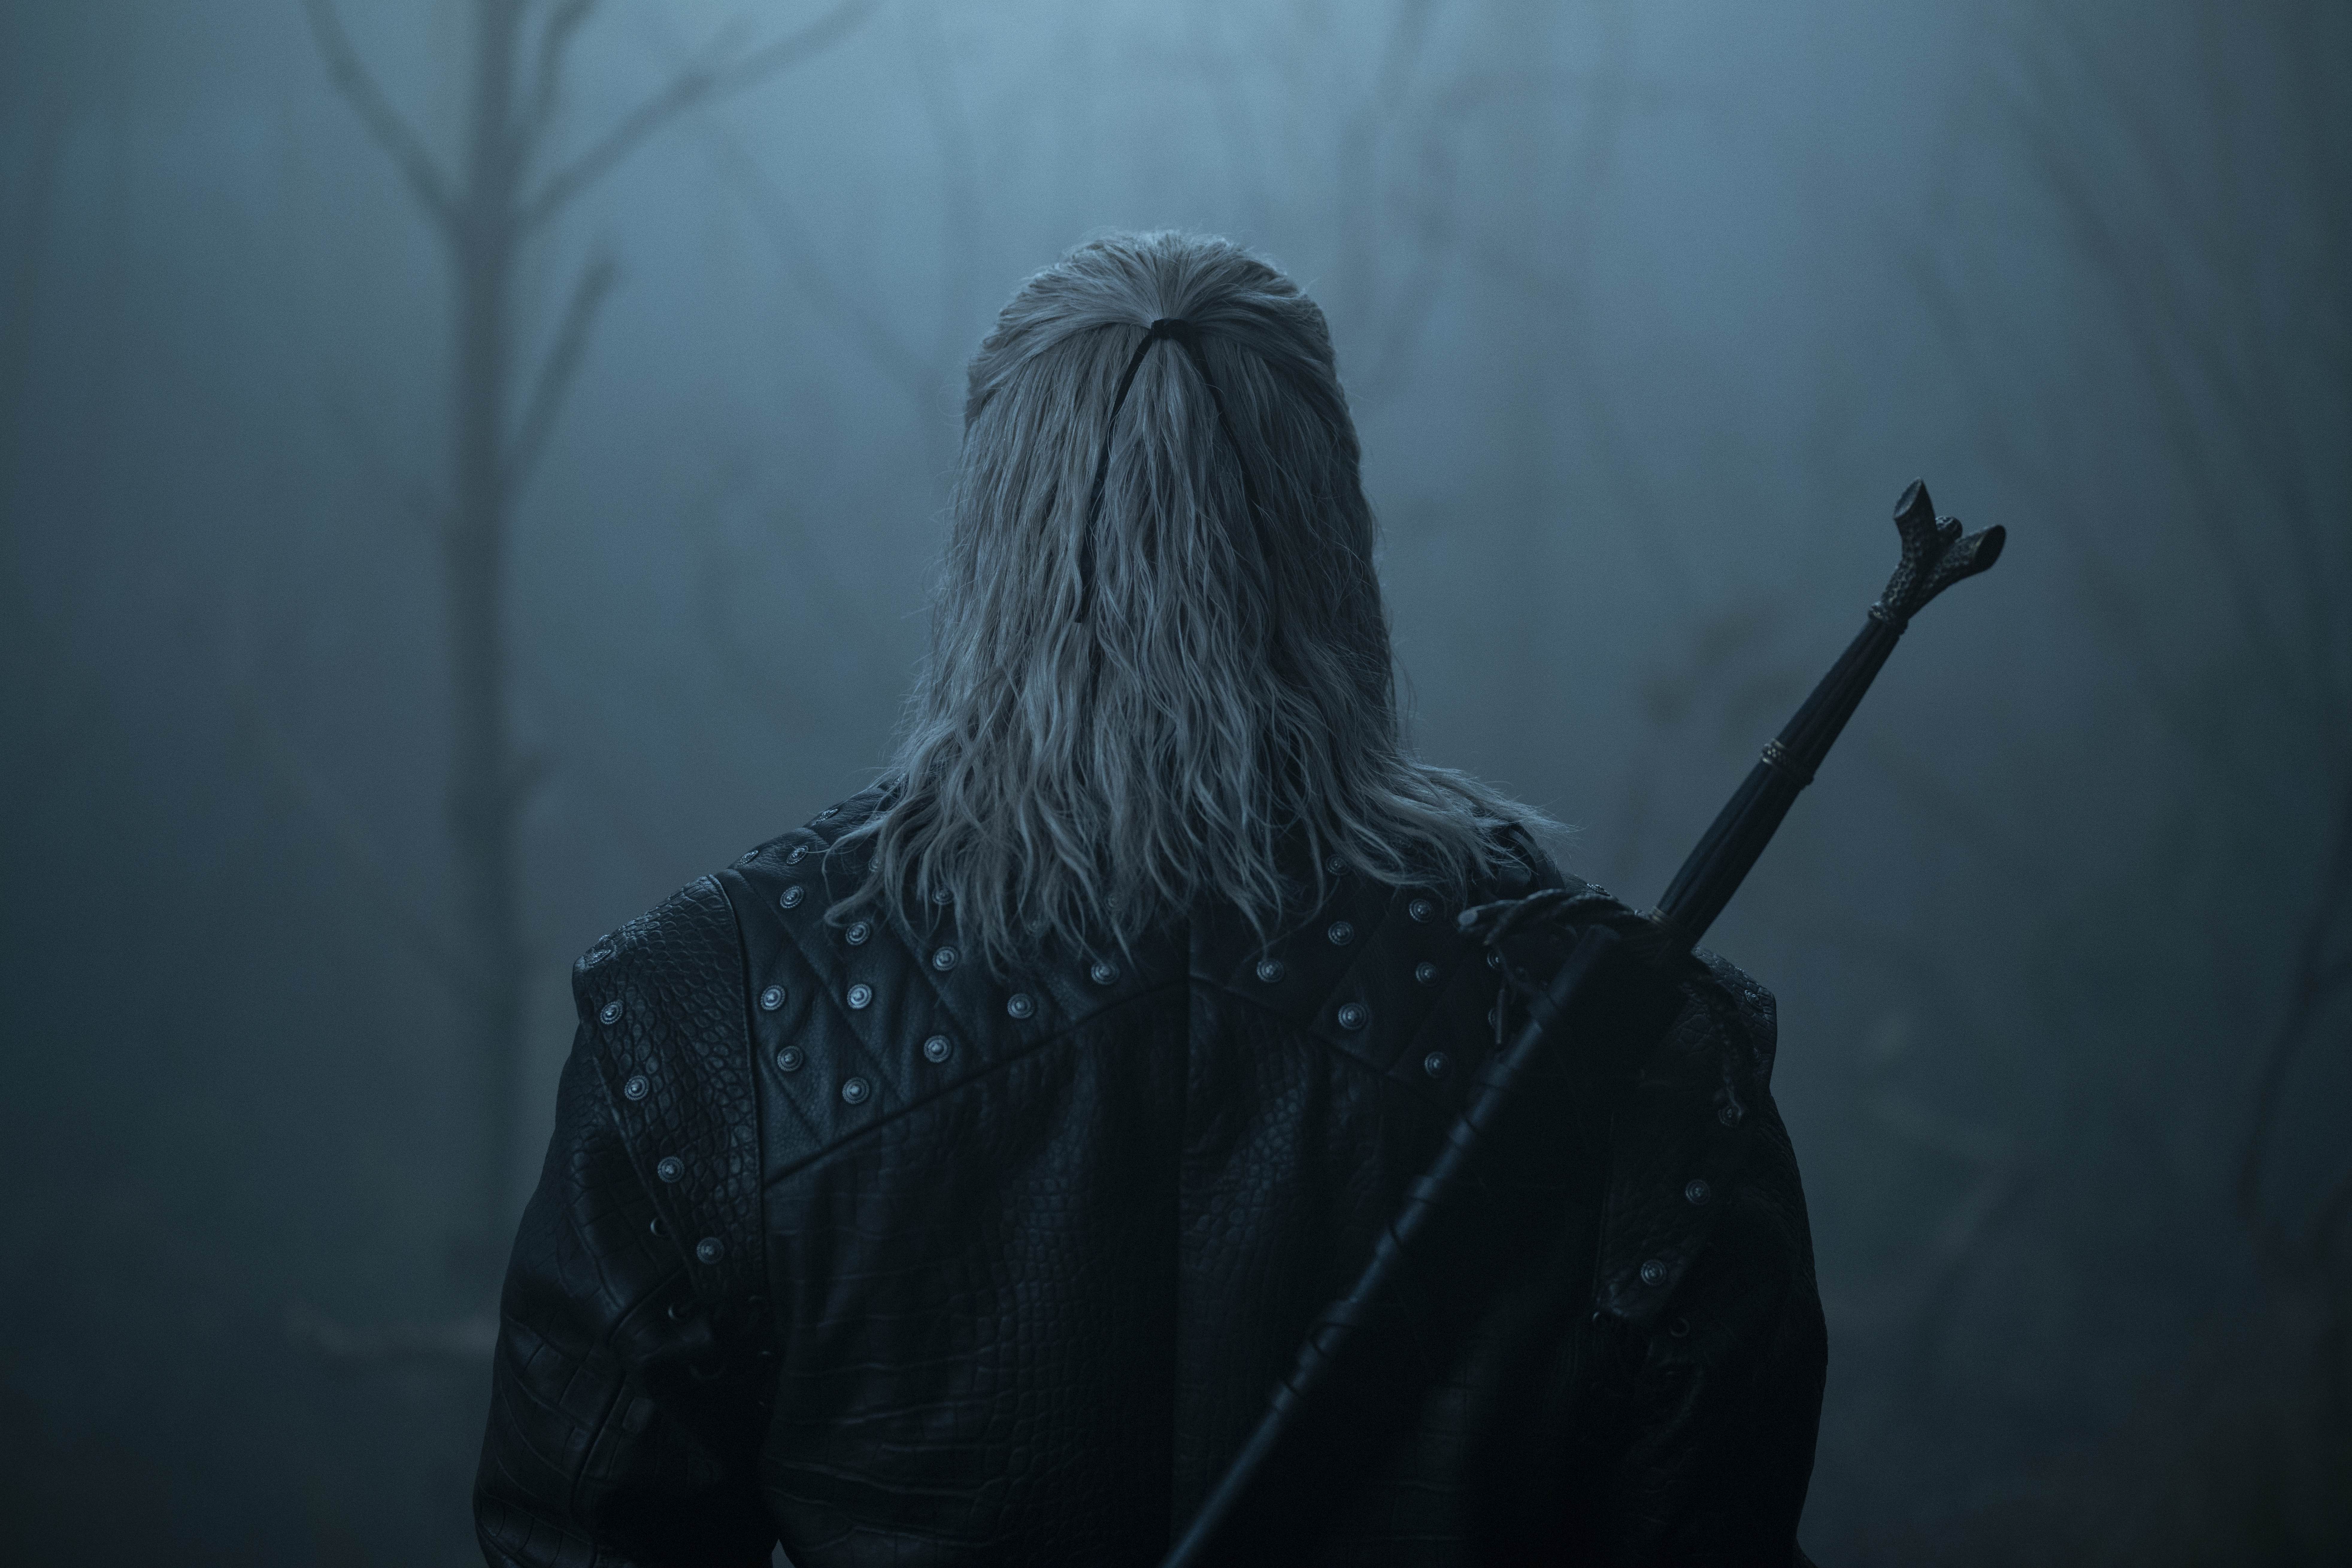 Liam Hemsworth as Geralt in Netflix’s The Witcher, shown very sneakily from behind.